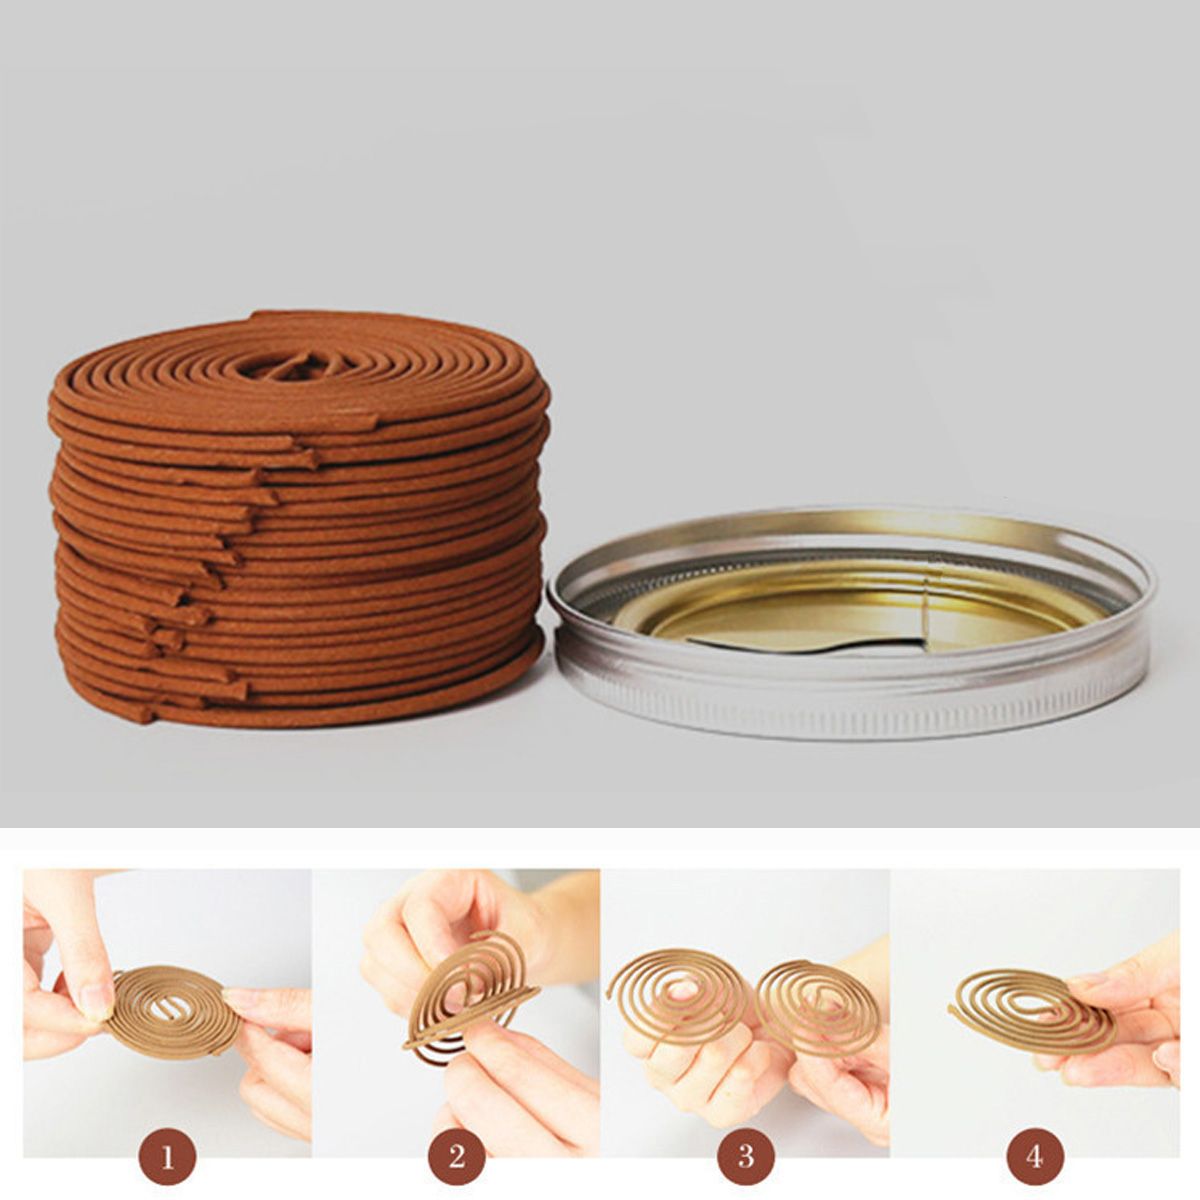 40Pcs-Mosquito-Dispeller-Coils-Anti-Midge-Bug-Repellant-Home-Camping-Outdoor-with-Holder-1324612